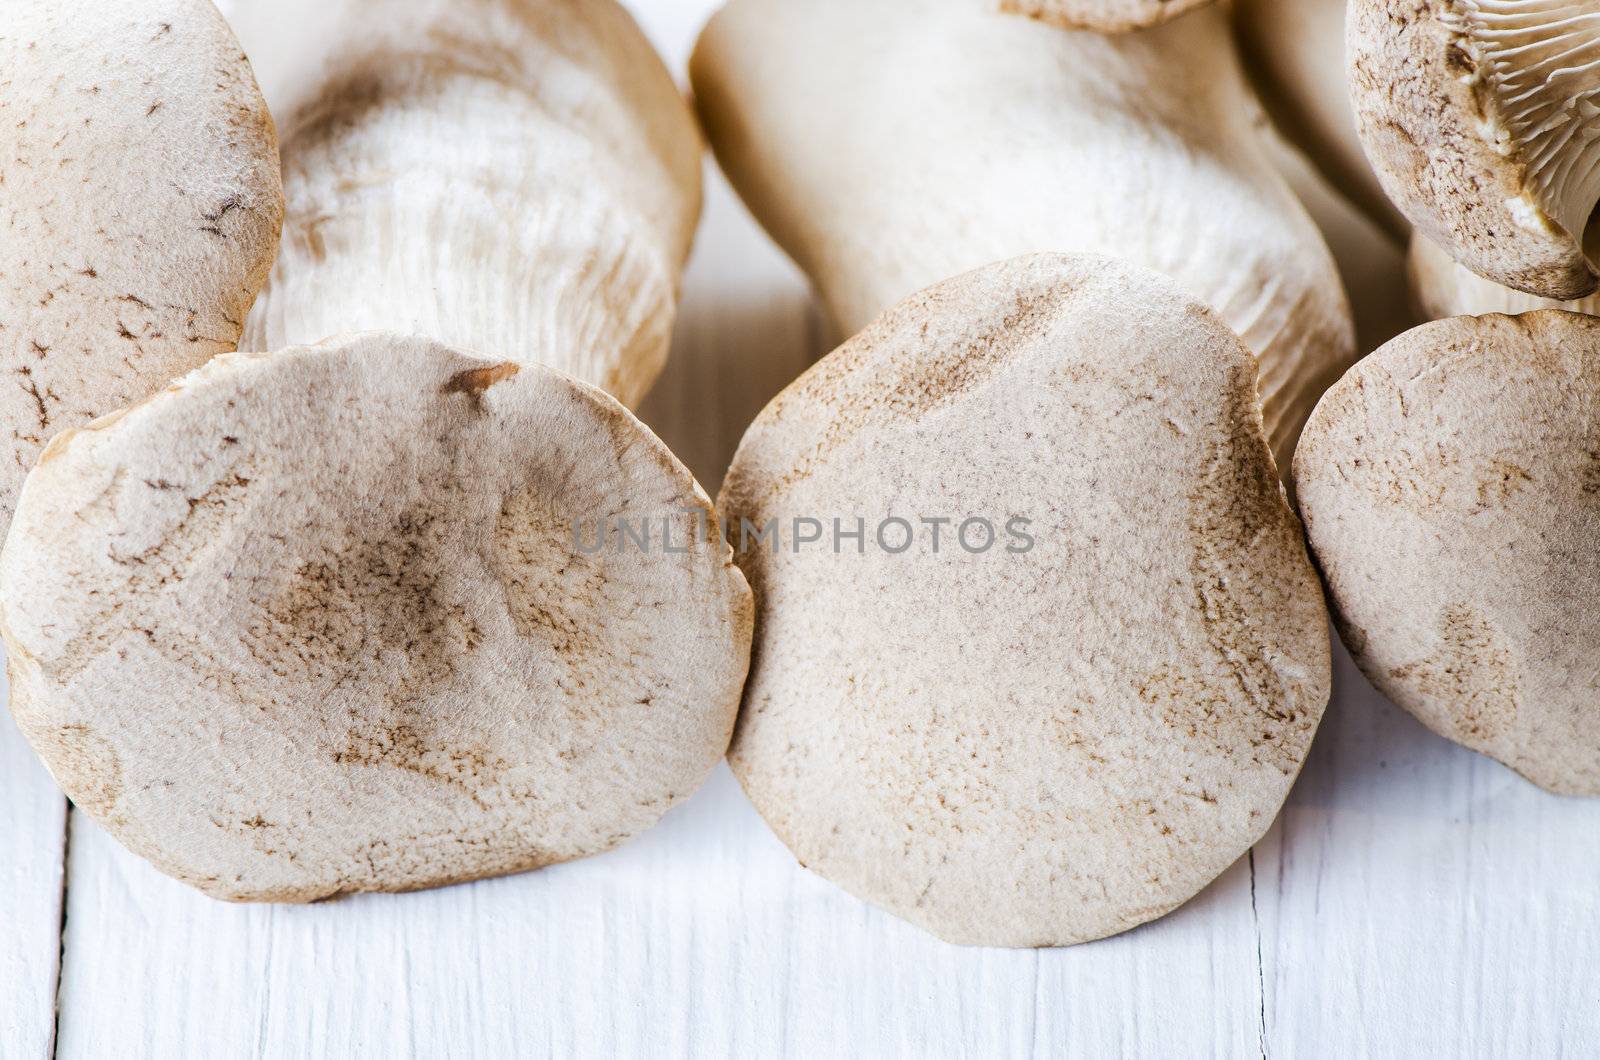 King oyster mushrooms on a white wooden table close up